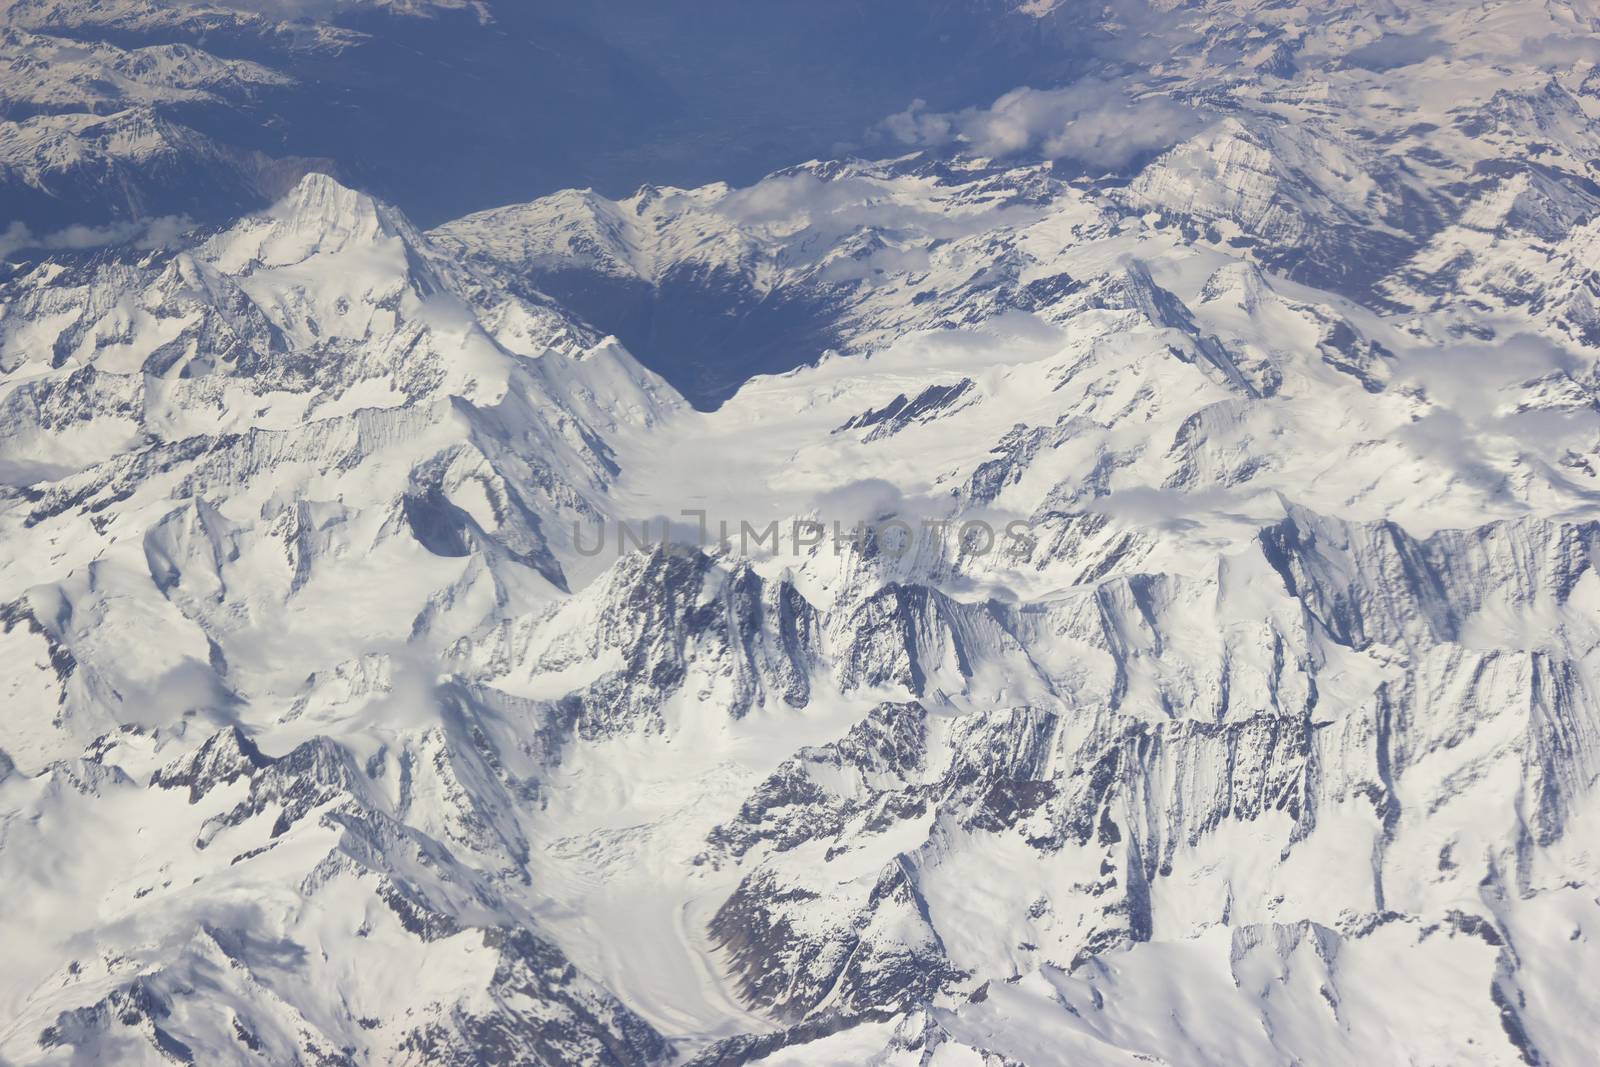 Alps - aerial view from window of airplane